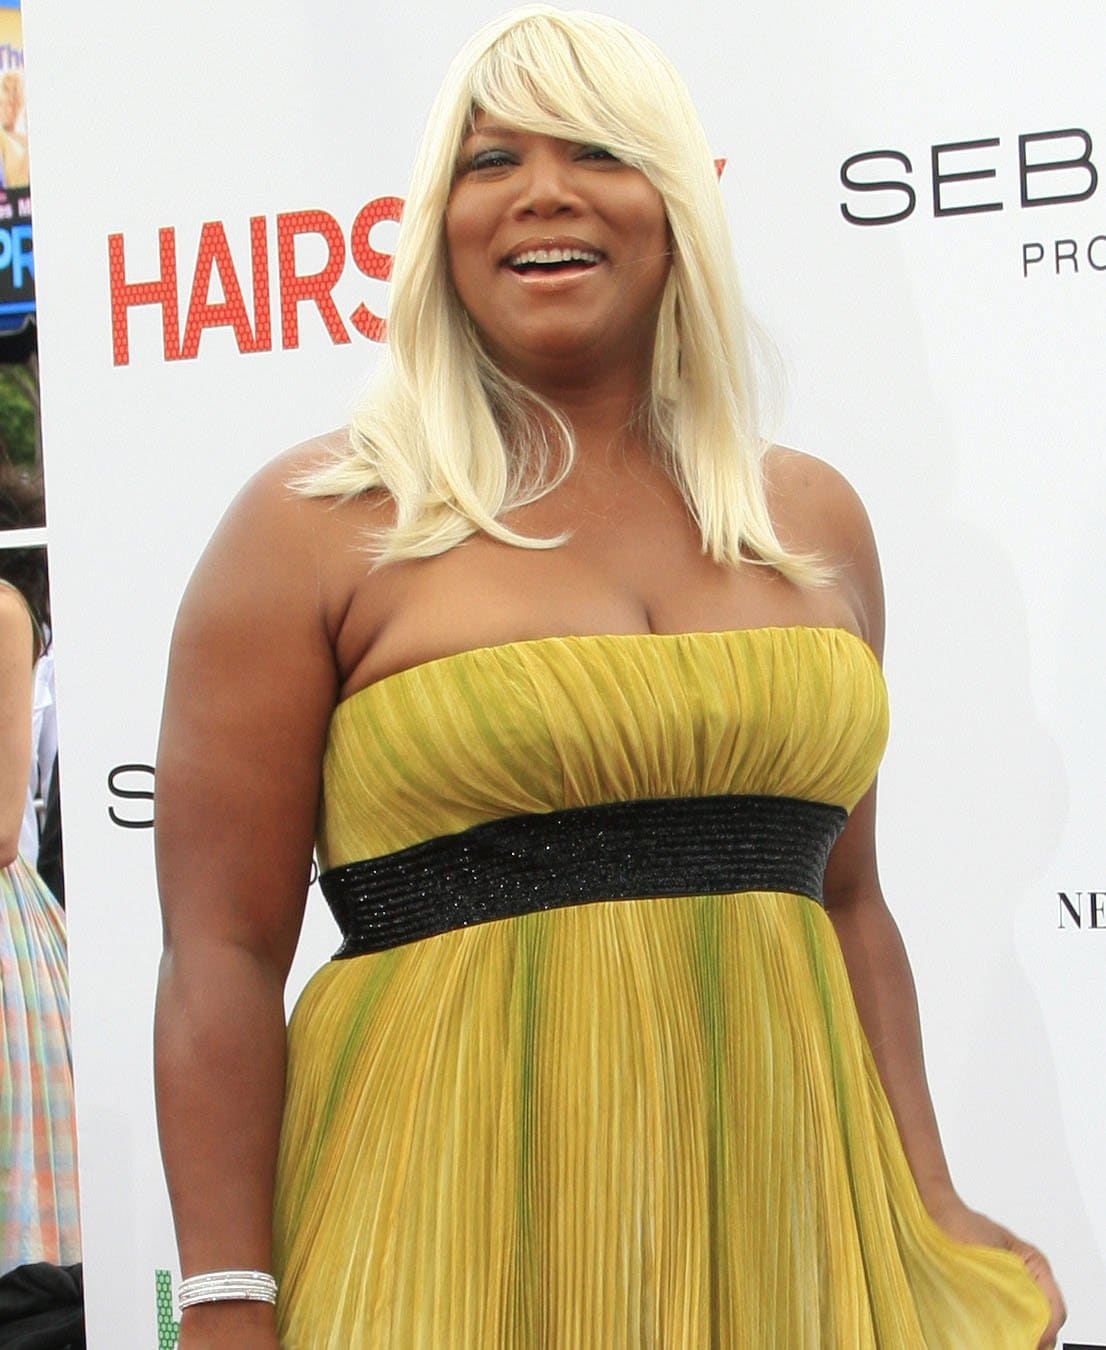 Aside from her music career, Queen Latifah also launched a career in acting in the early 1990s, starring in films like Chicago, Bringing Down the House, and Hairspray